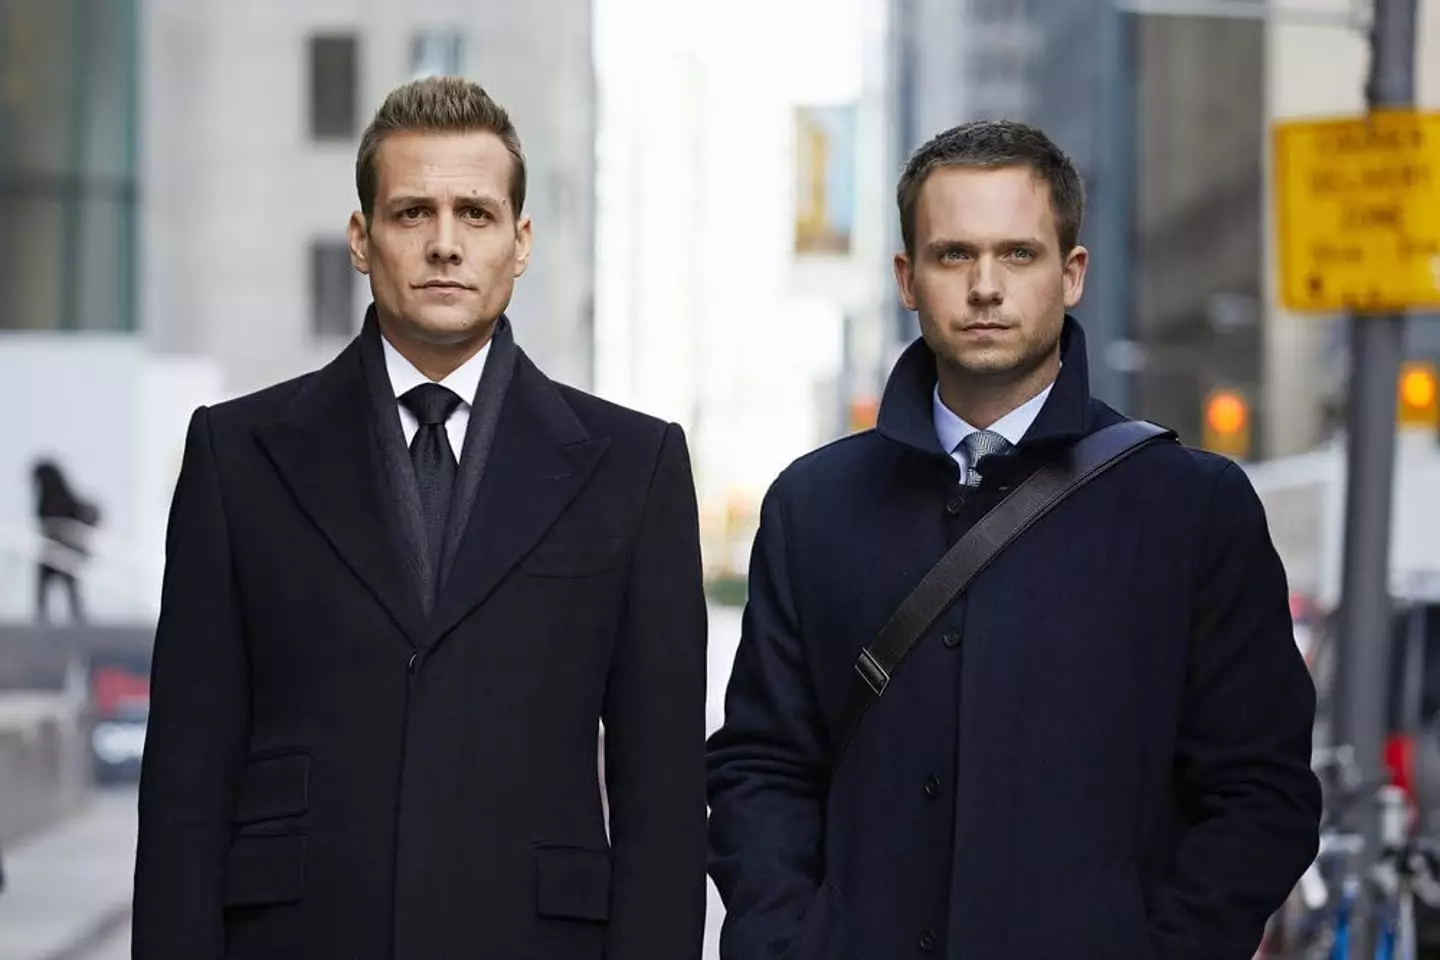 Gabriel Macht (left) and Patrick J. Adams (right) in Suits.